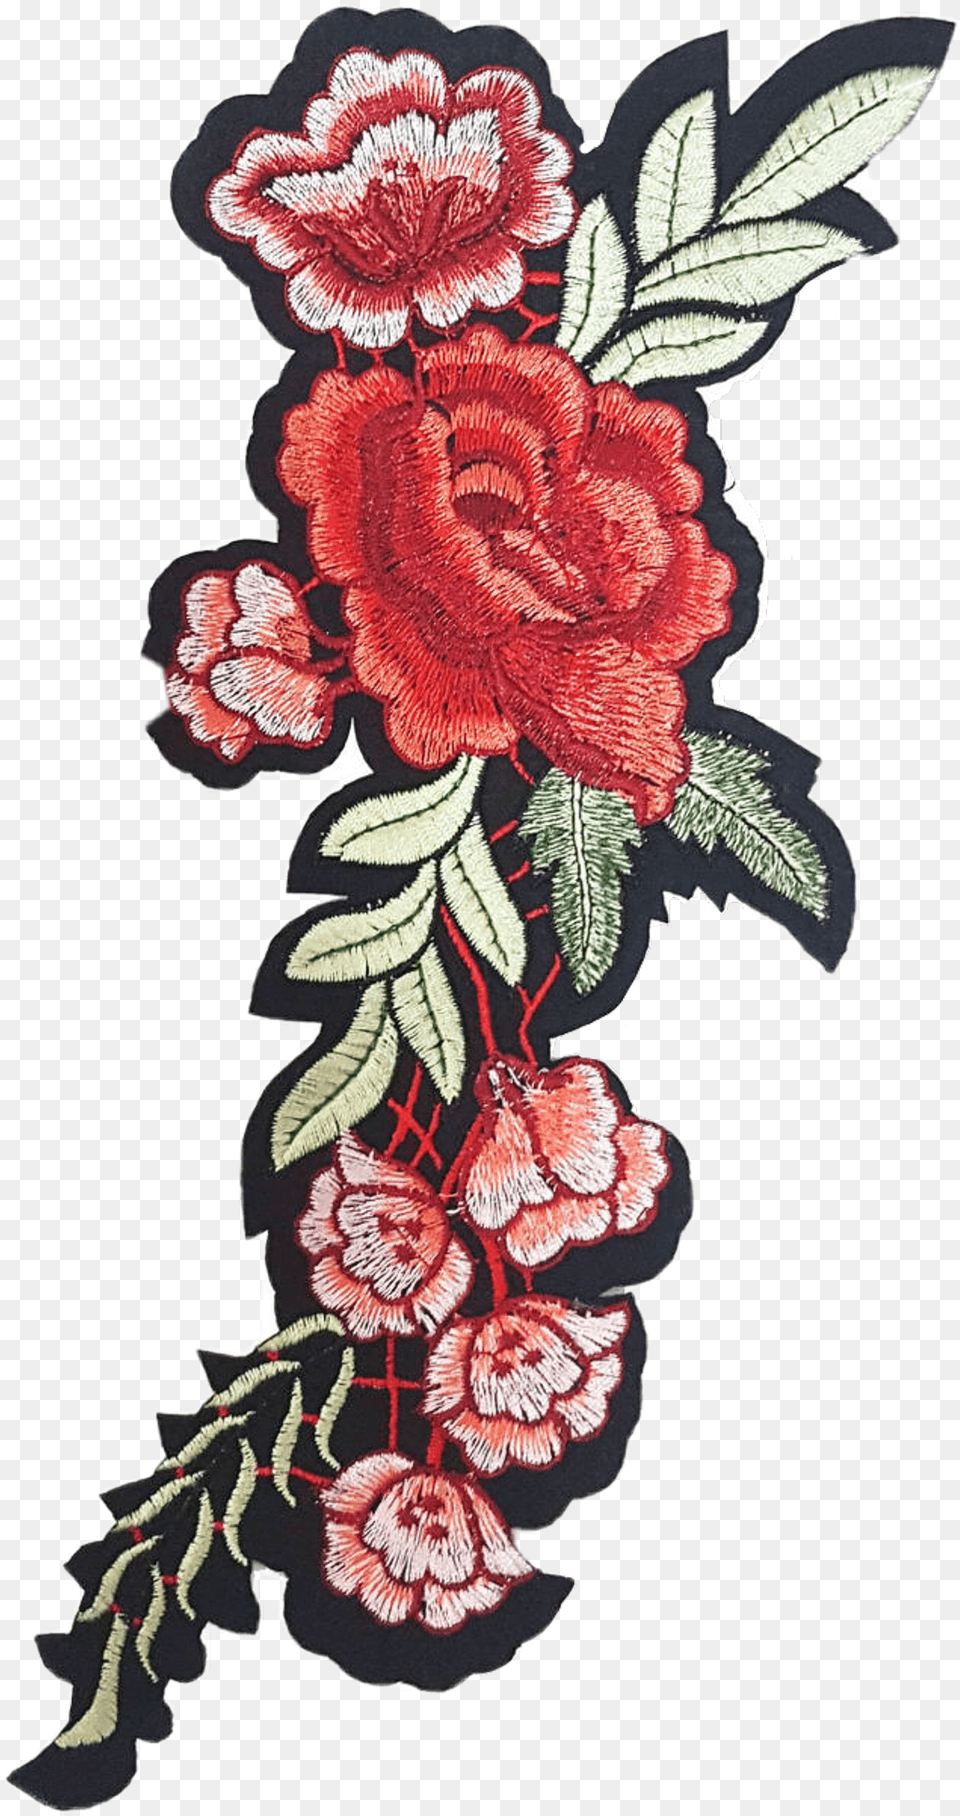 Download Gucci Mane Gucci Rose Gucci Flower, Art, Embroidery, Floral Design, Graphics Free Transparent Png